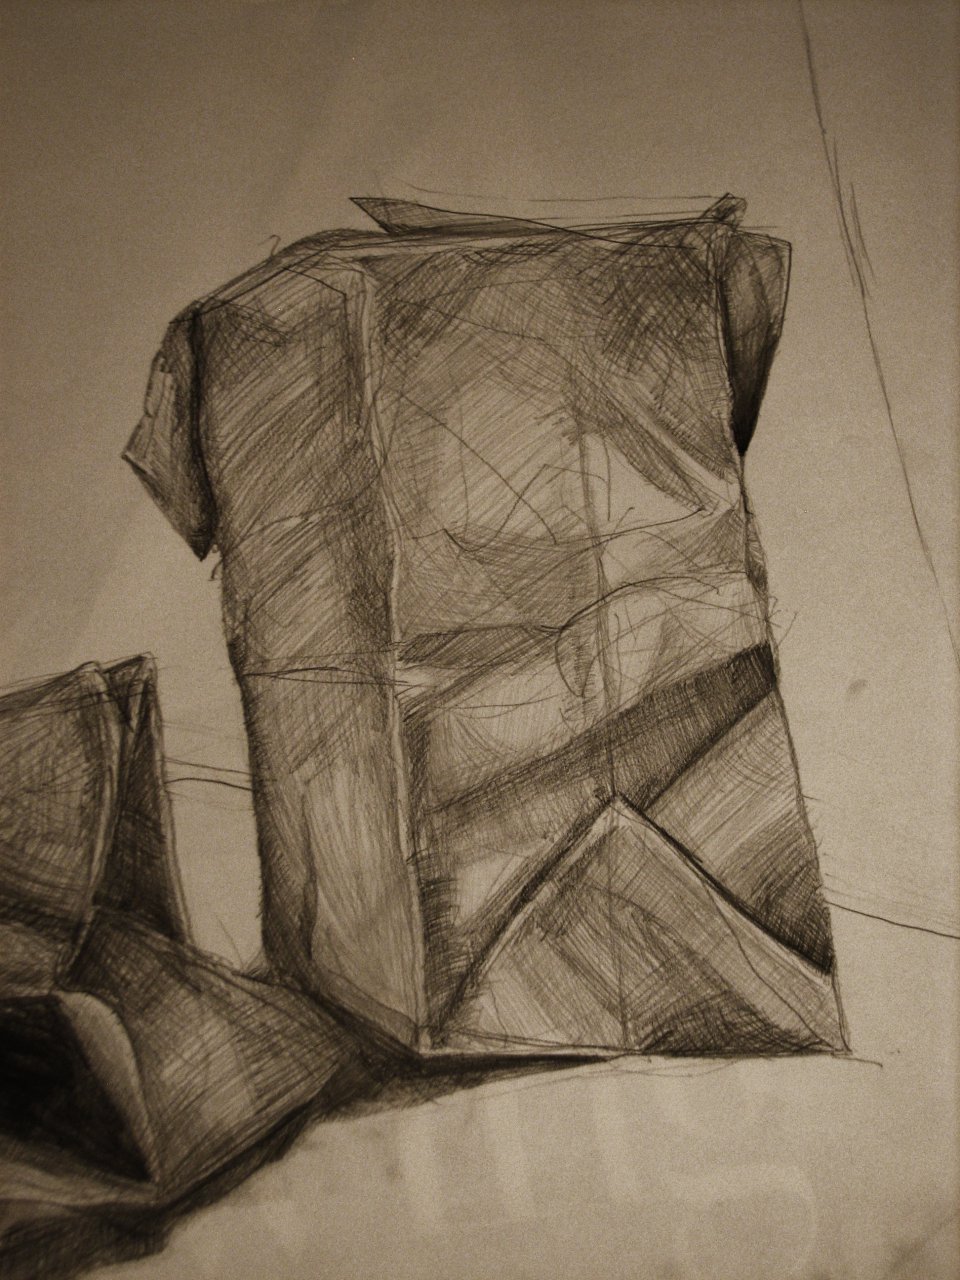 Foundation Drawing I: Paper Bag Drawing by The-Wandering-Angel on DeviantArt